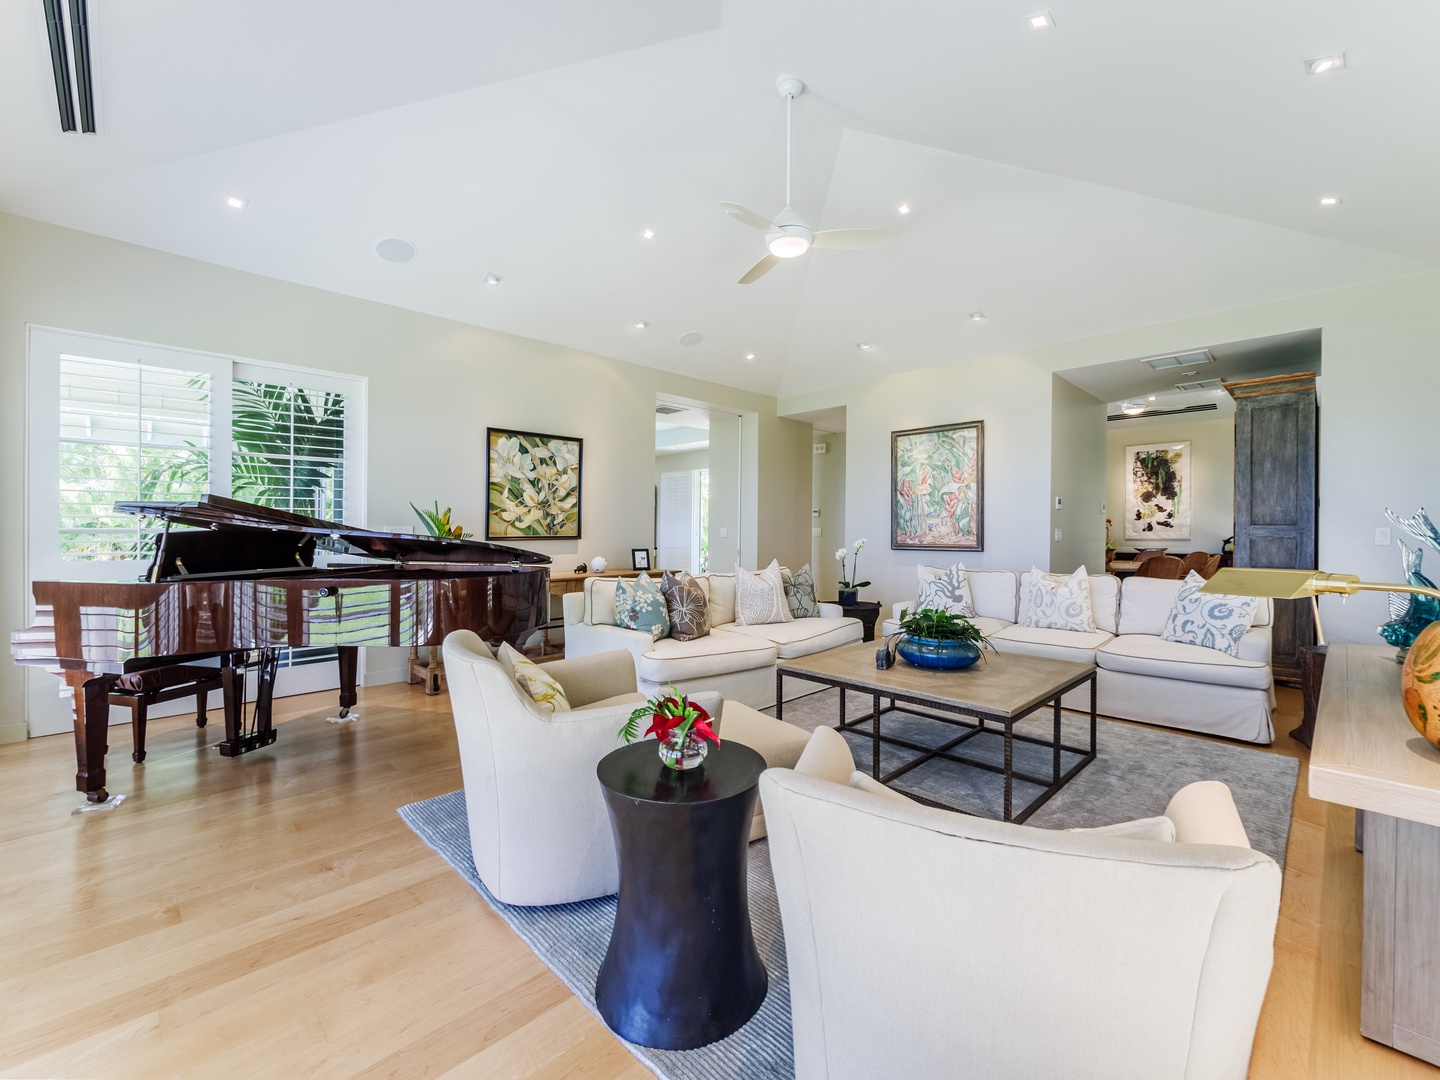 Honolulu Vacation Rentals, Paradise Beach Estate - Step into paradise with an open-concept floorplan, where plush furnishings beckon for relaxation and conversation flows seamlessly.